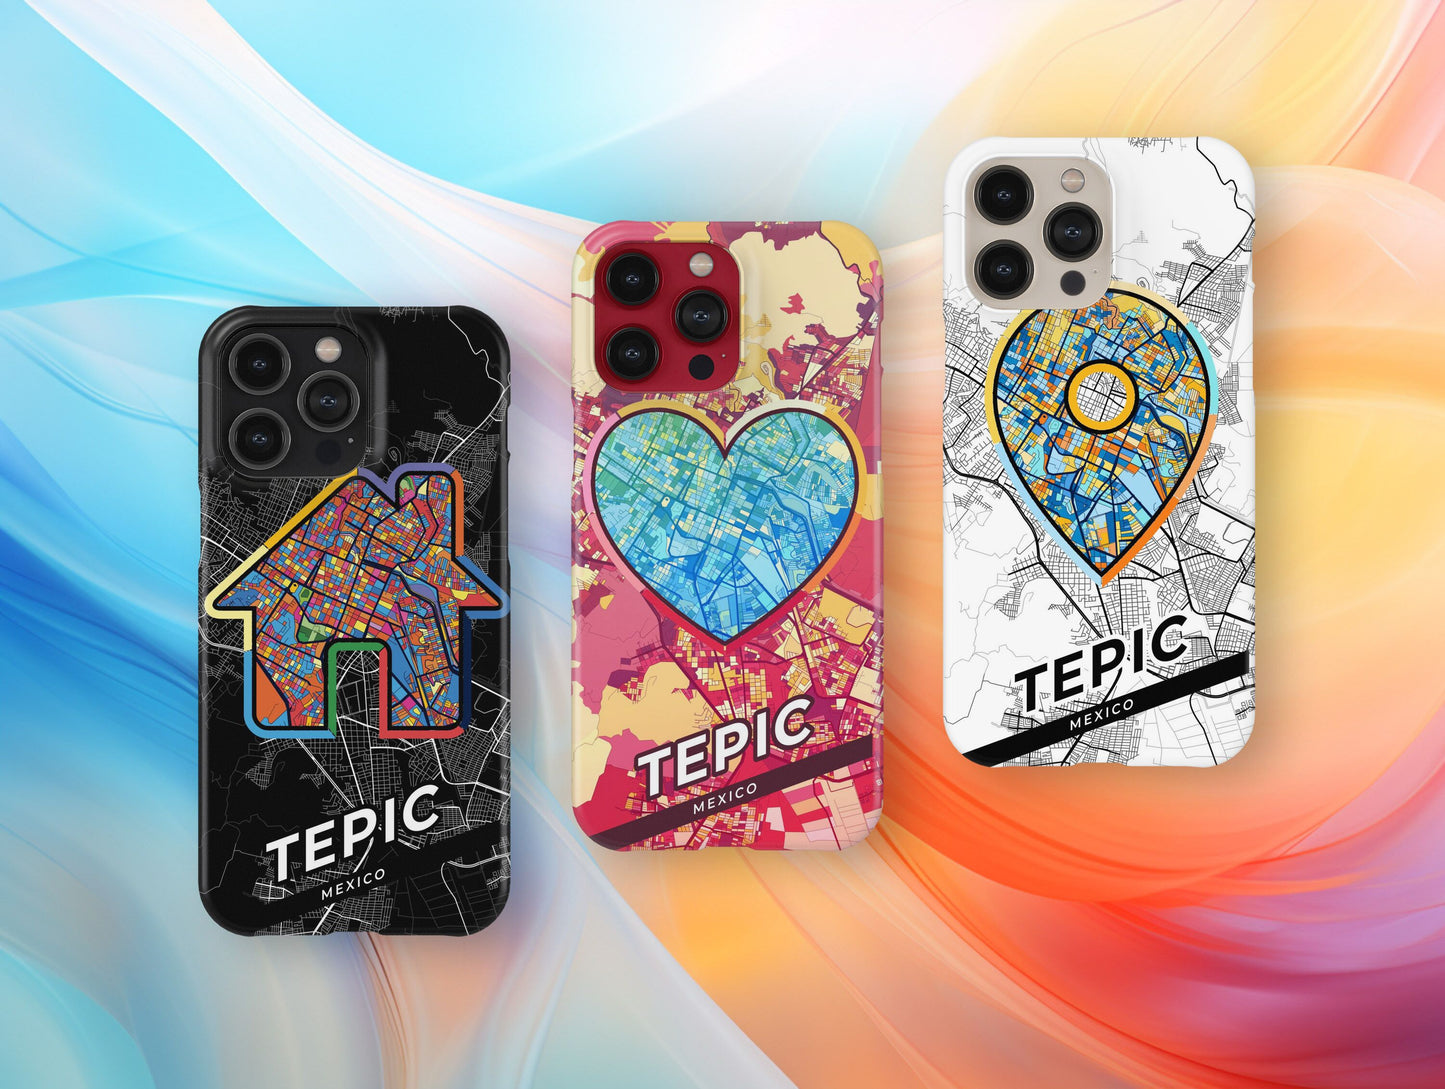 Tepic Mexico slim phone case with colorful icon